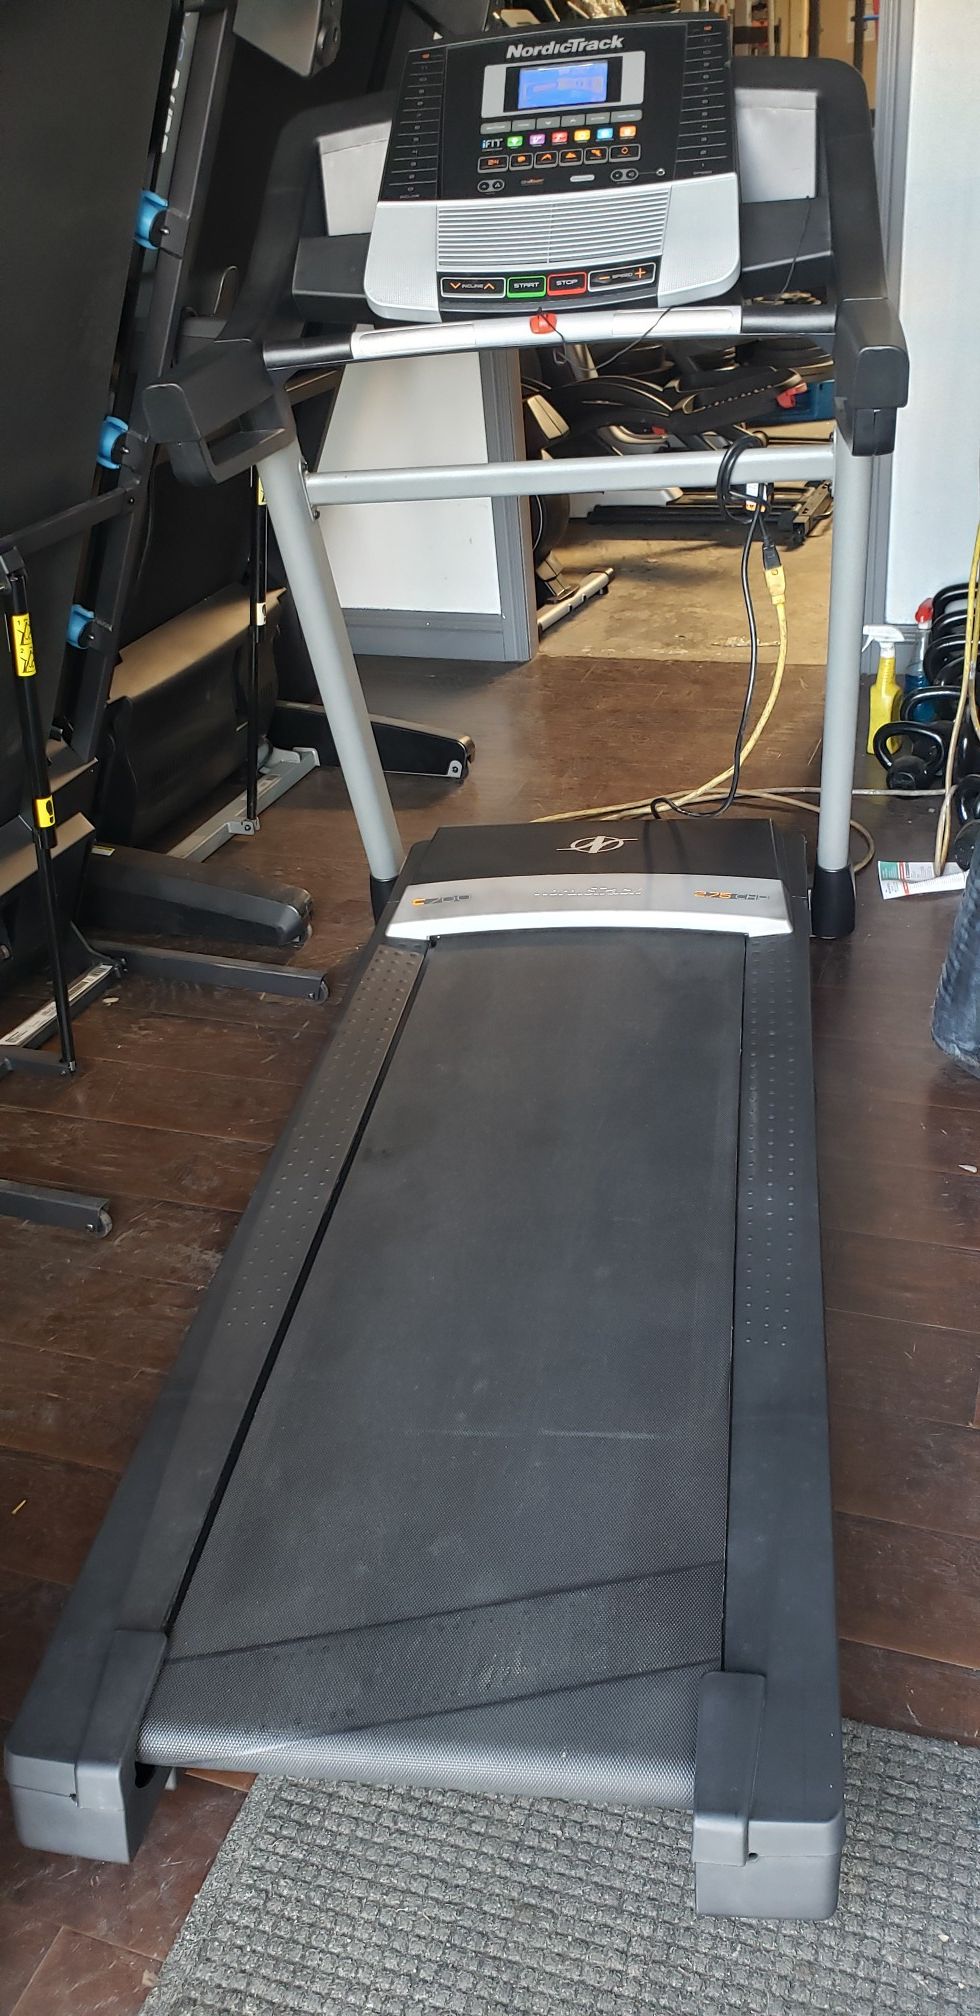 Nordictrack C700 treadmill 300lbs weight Capacity great cardio machine for your home gym